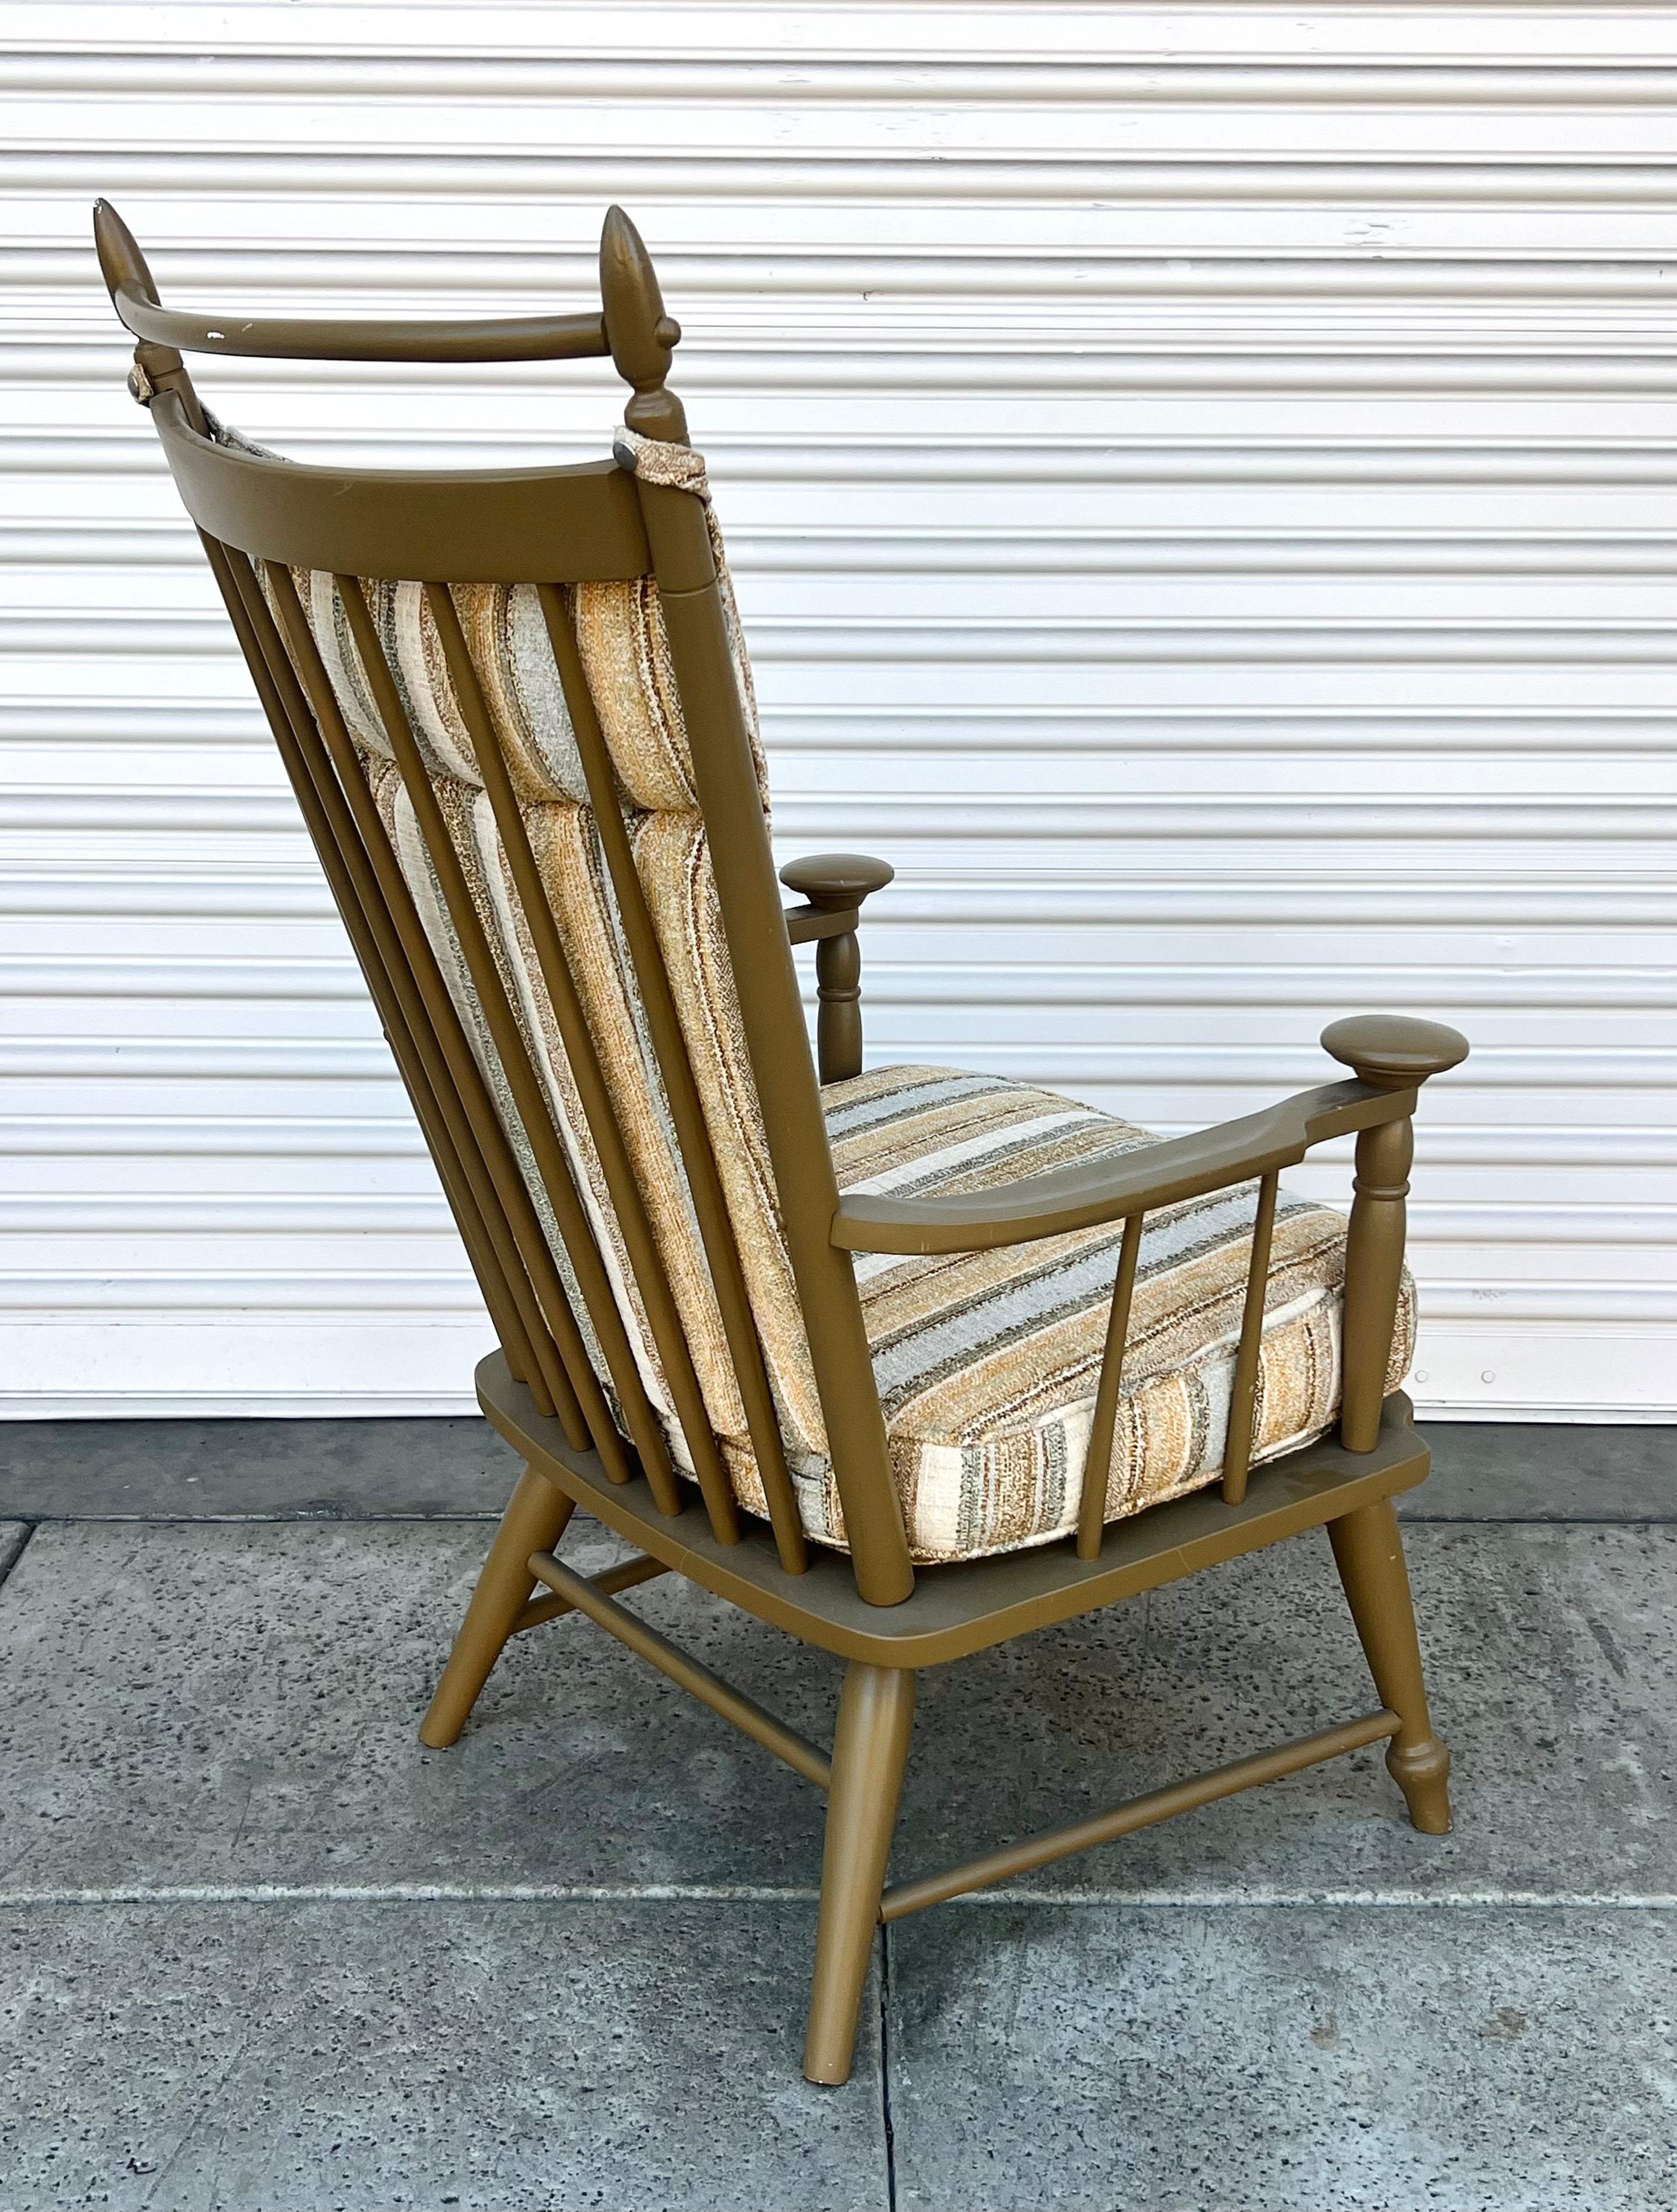 1970s Windsor Neutral Painted Chair (Vintage)